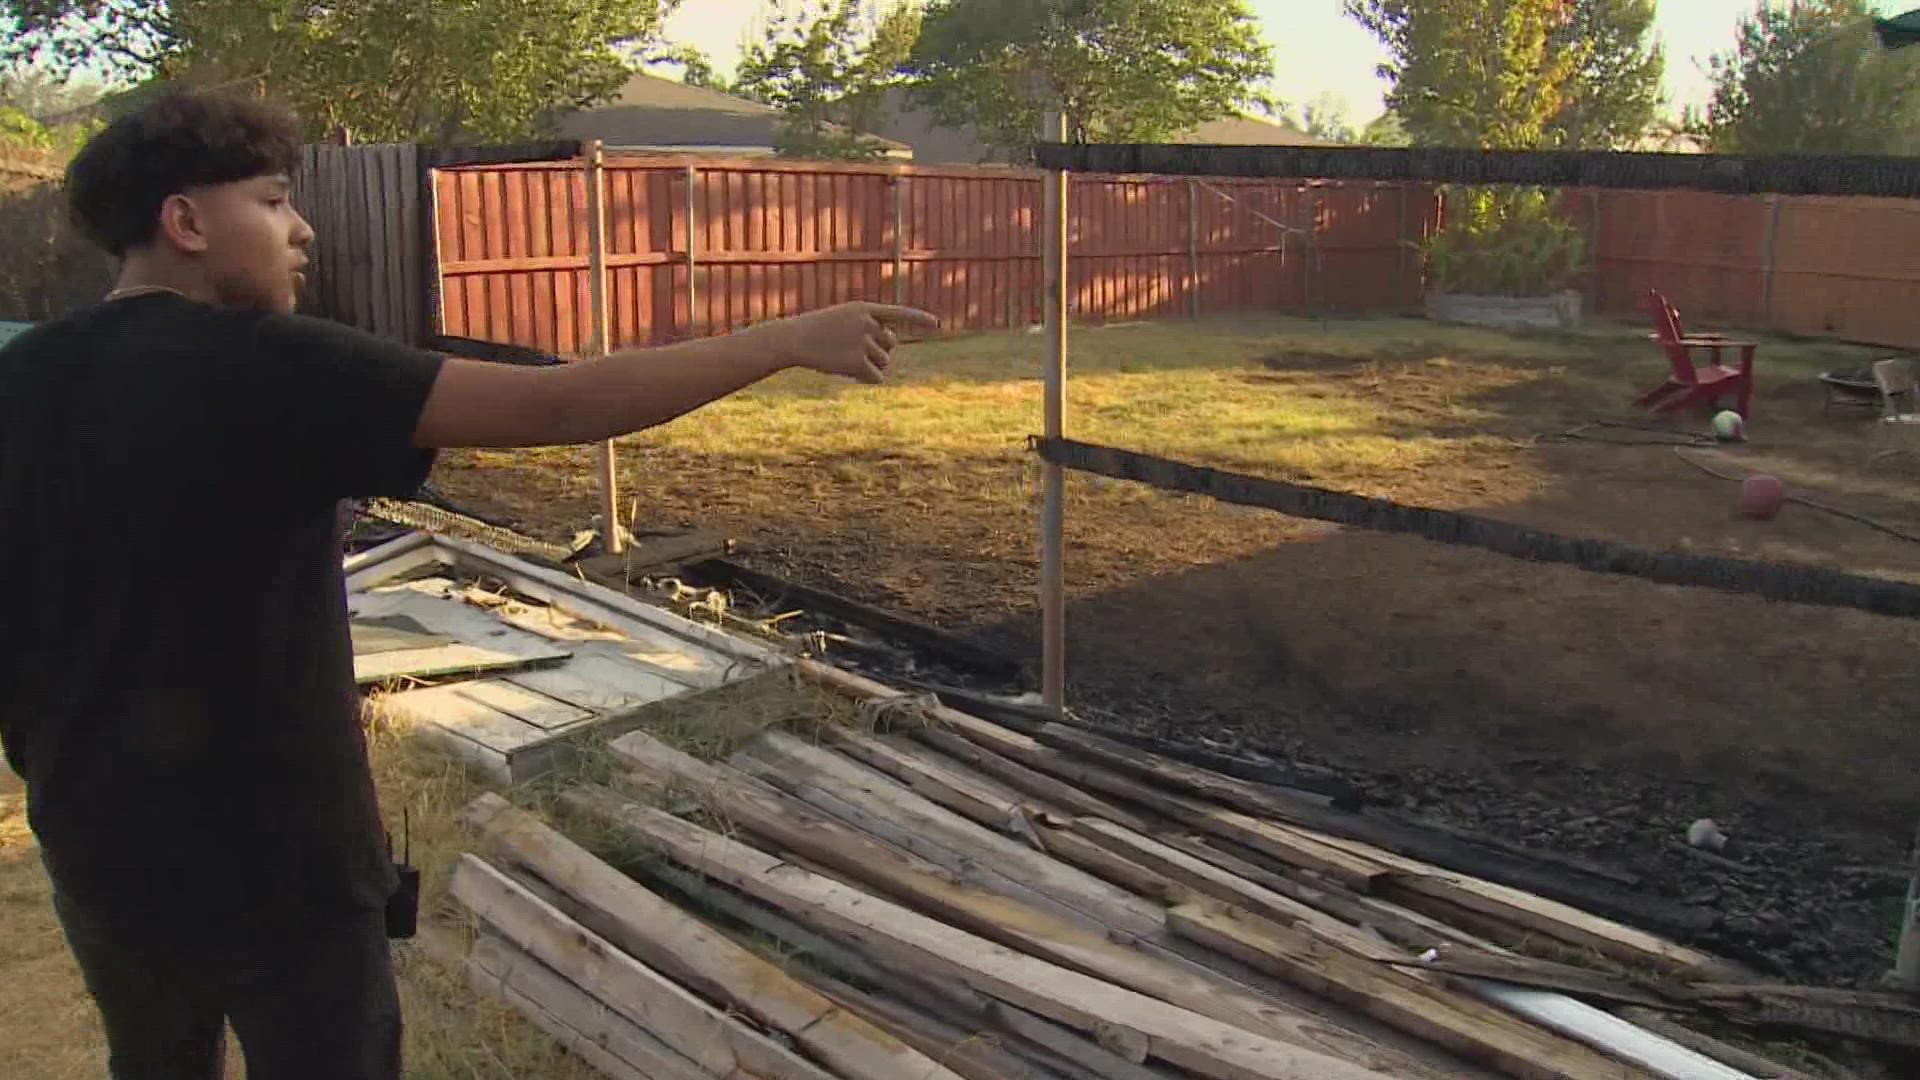 The fence between the 13-year-old's Balch Springs house and his neighbor’s house was on fire Monday afternoon.